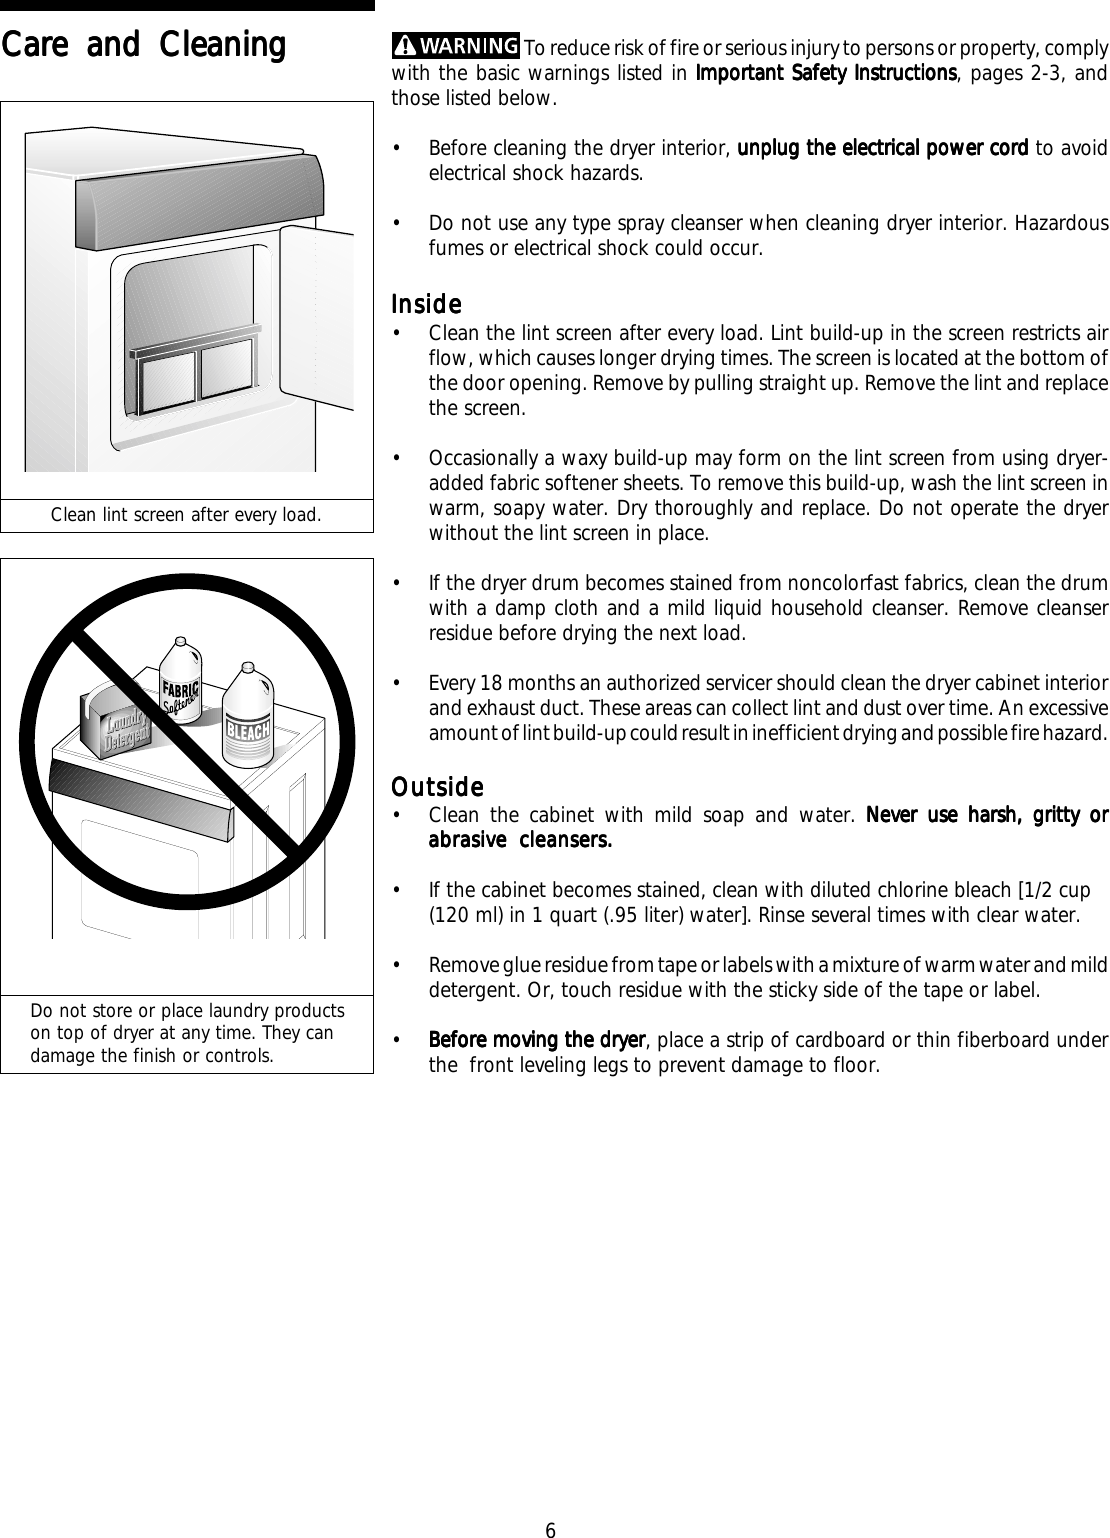 Page 6 of 10 - Electrolux-Gibson Electrolux-Gibson-Stackable-Dryer-Users-Manual- 6279e  Electrolux-gibson-stackable-dryer-users-manual